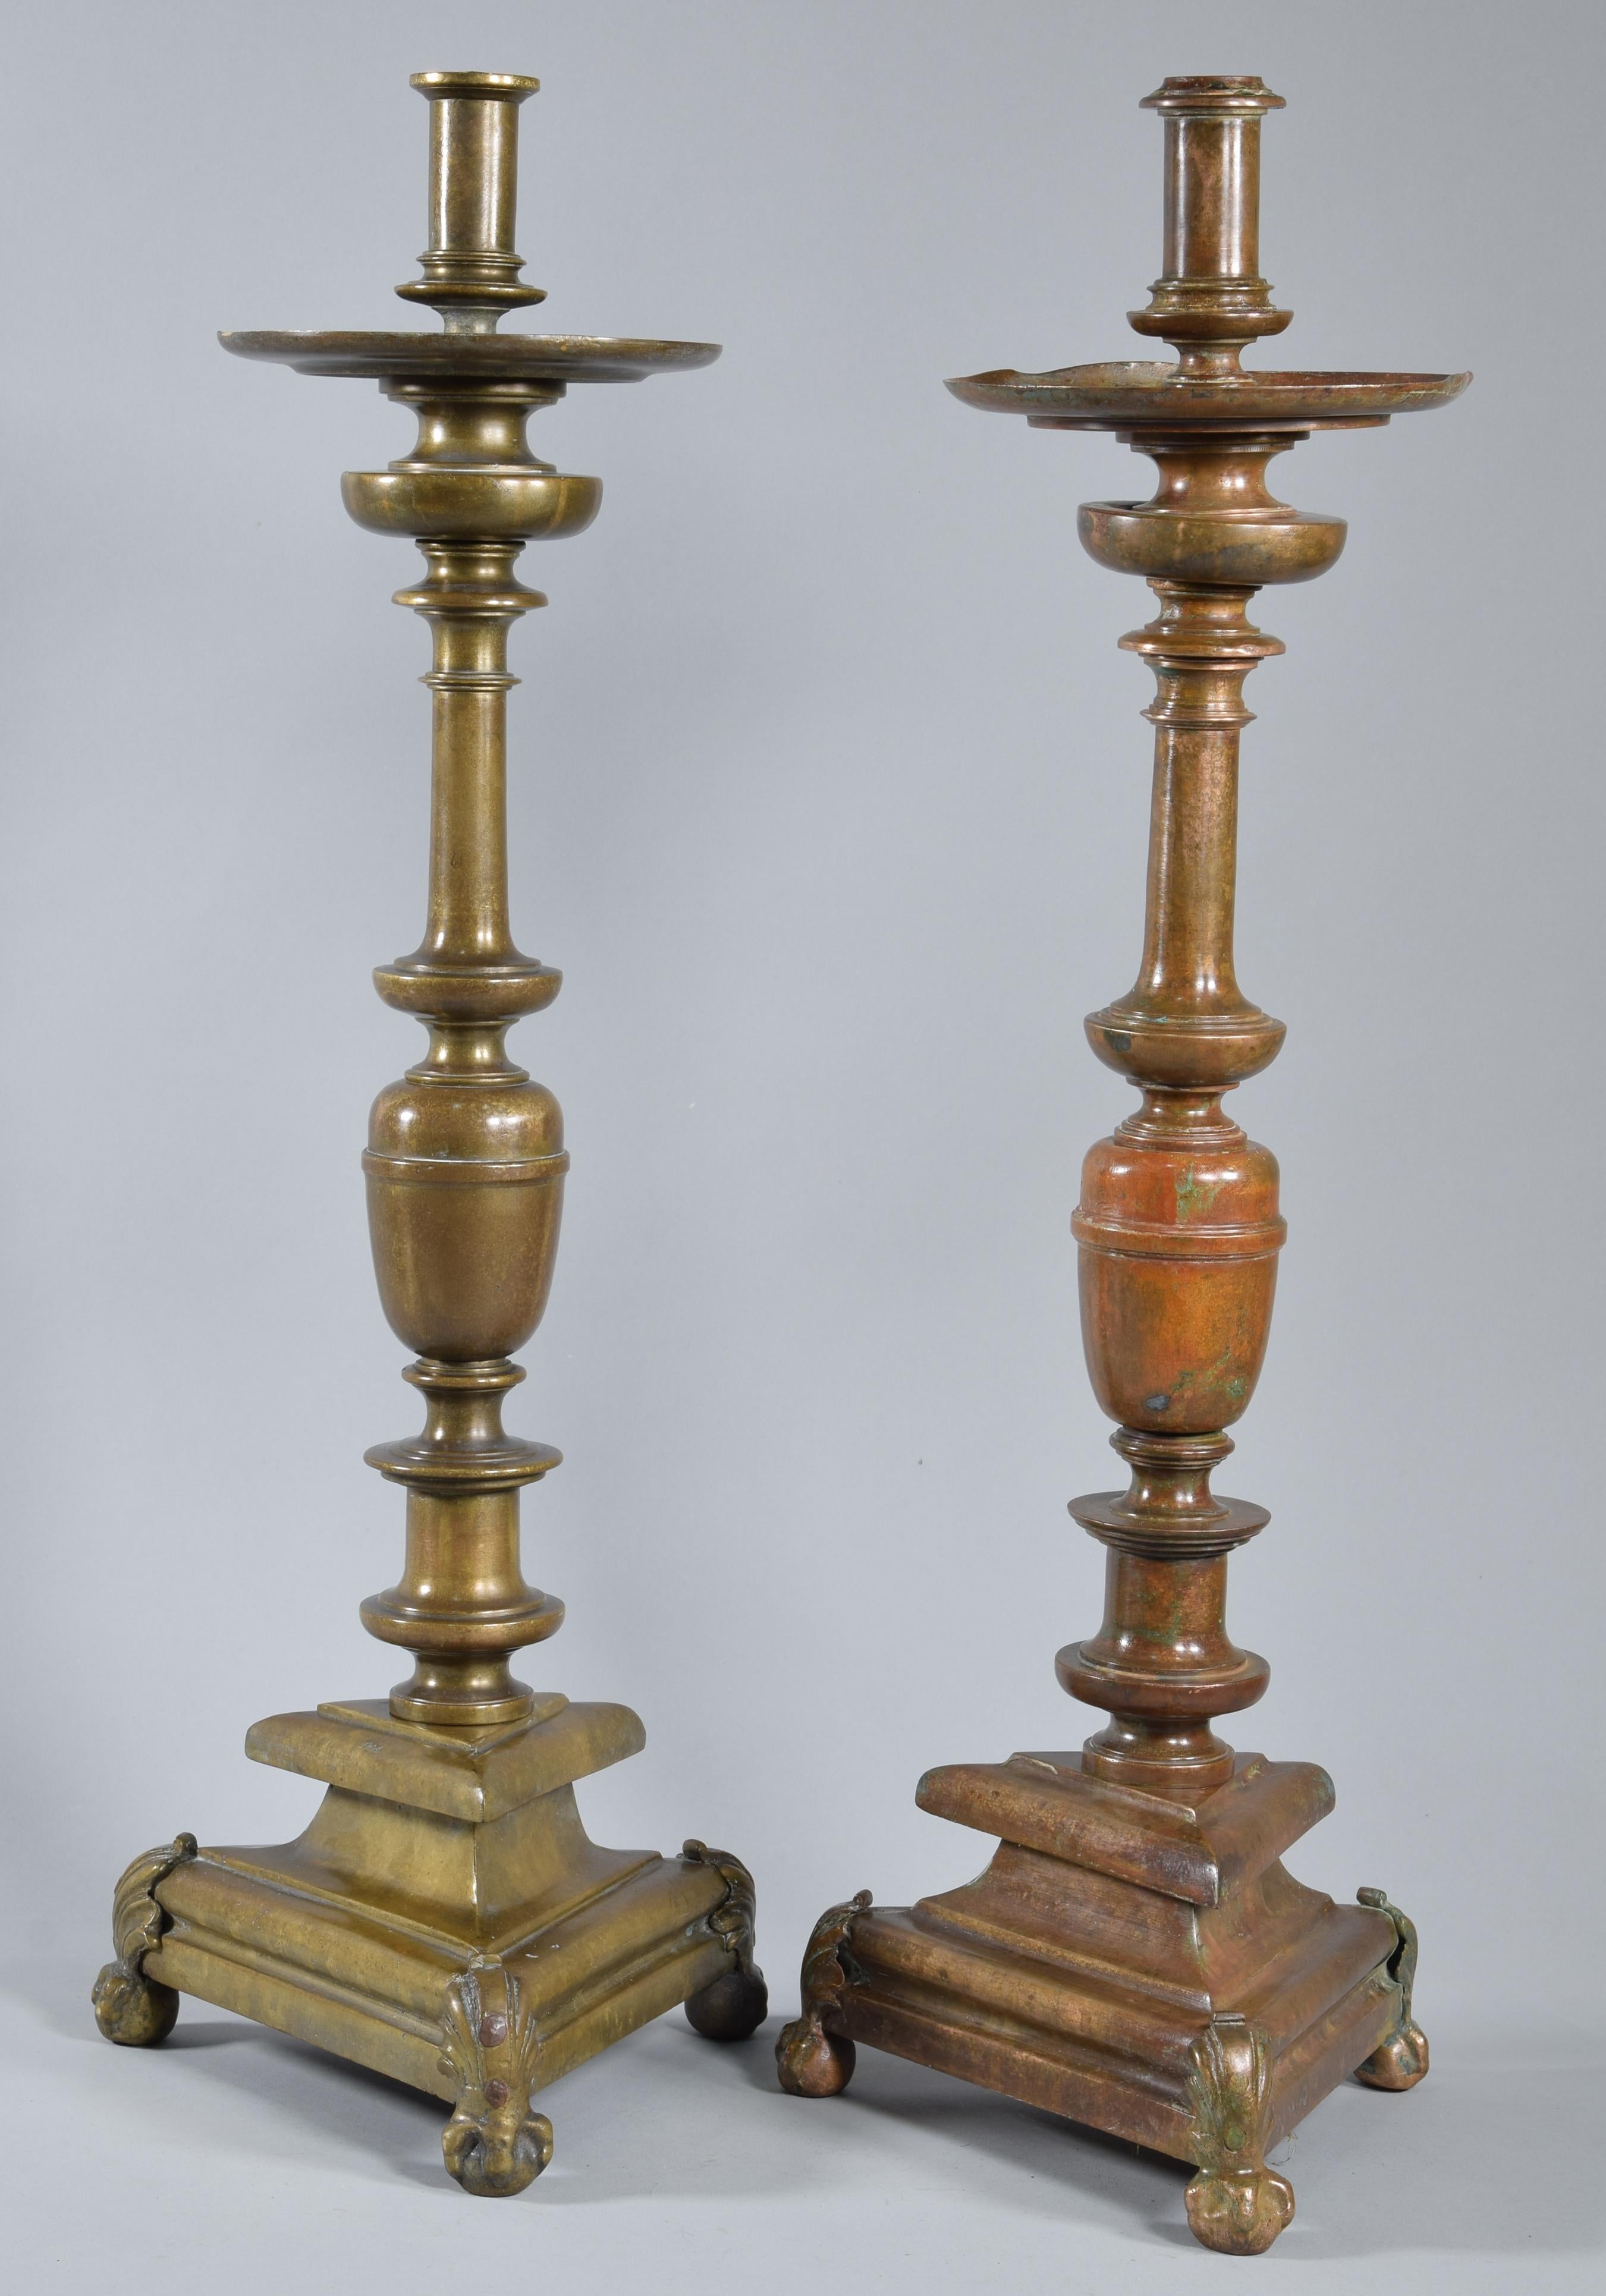 Baroque Bronze Candle Holders Pair, 20th Century, after Antique Models For Sale